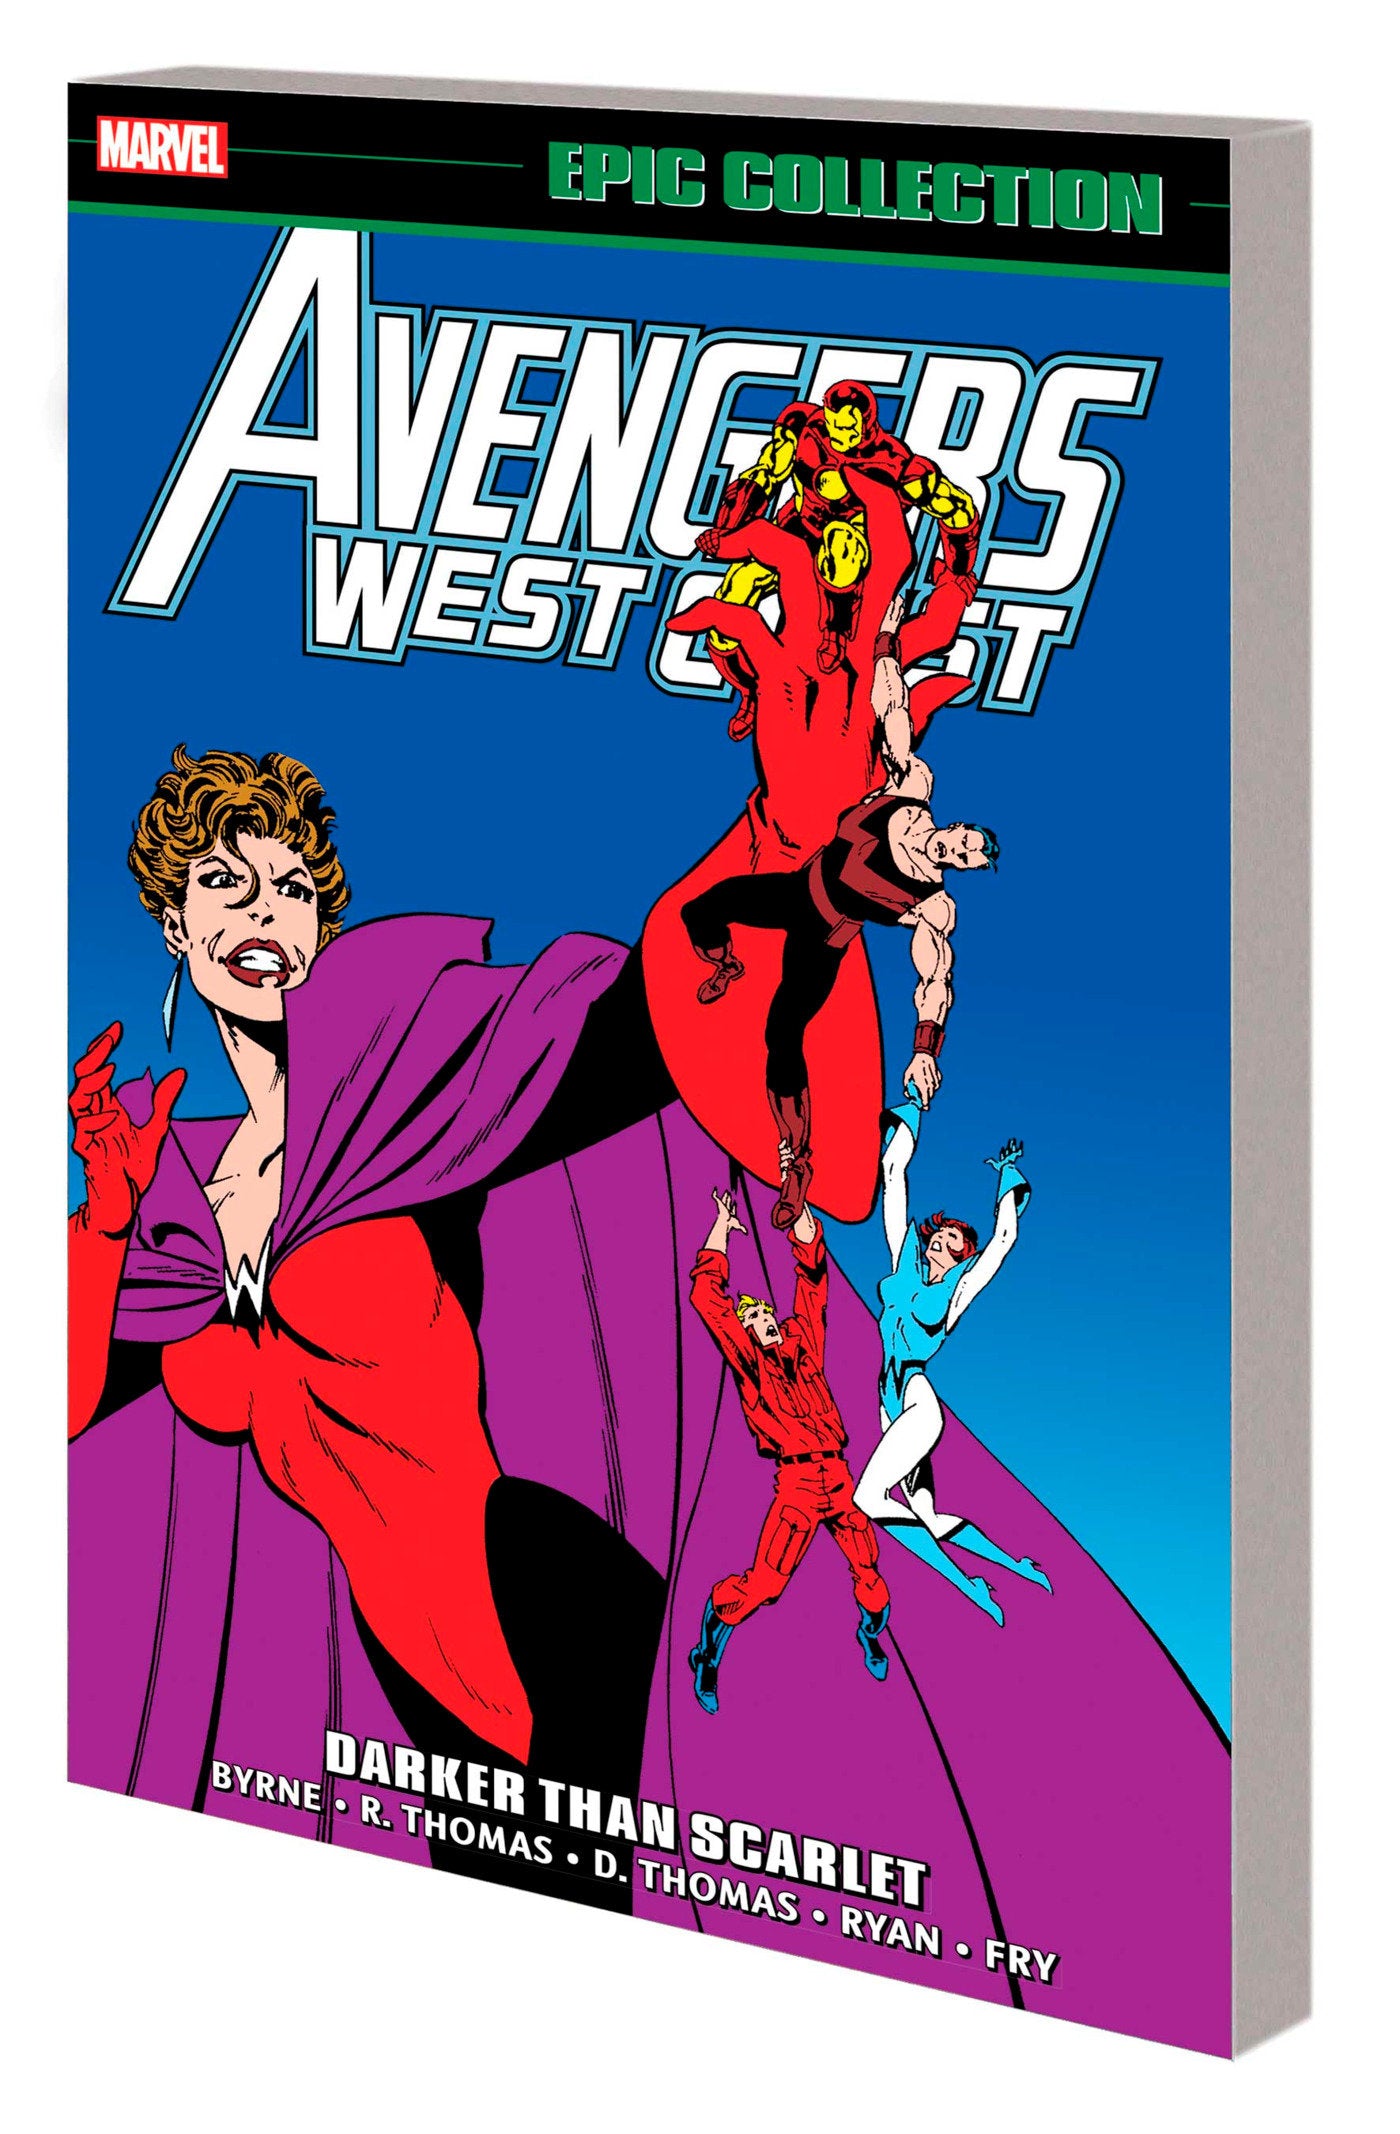 AVENGERS WEST COAST EPIC COLLECTION: DARKER THAN SCARLET TRADE PAPERBACK